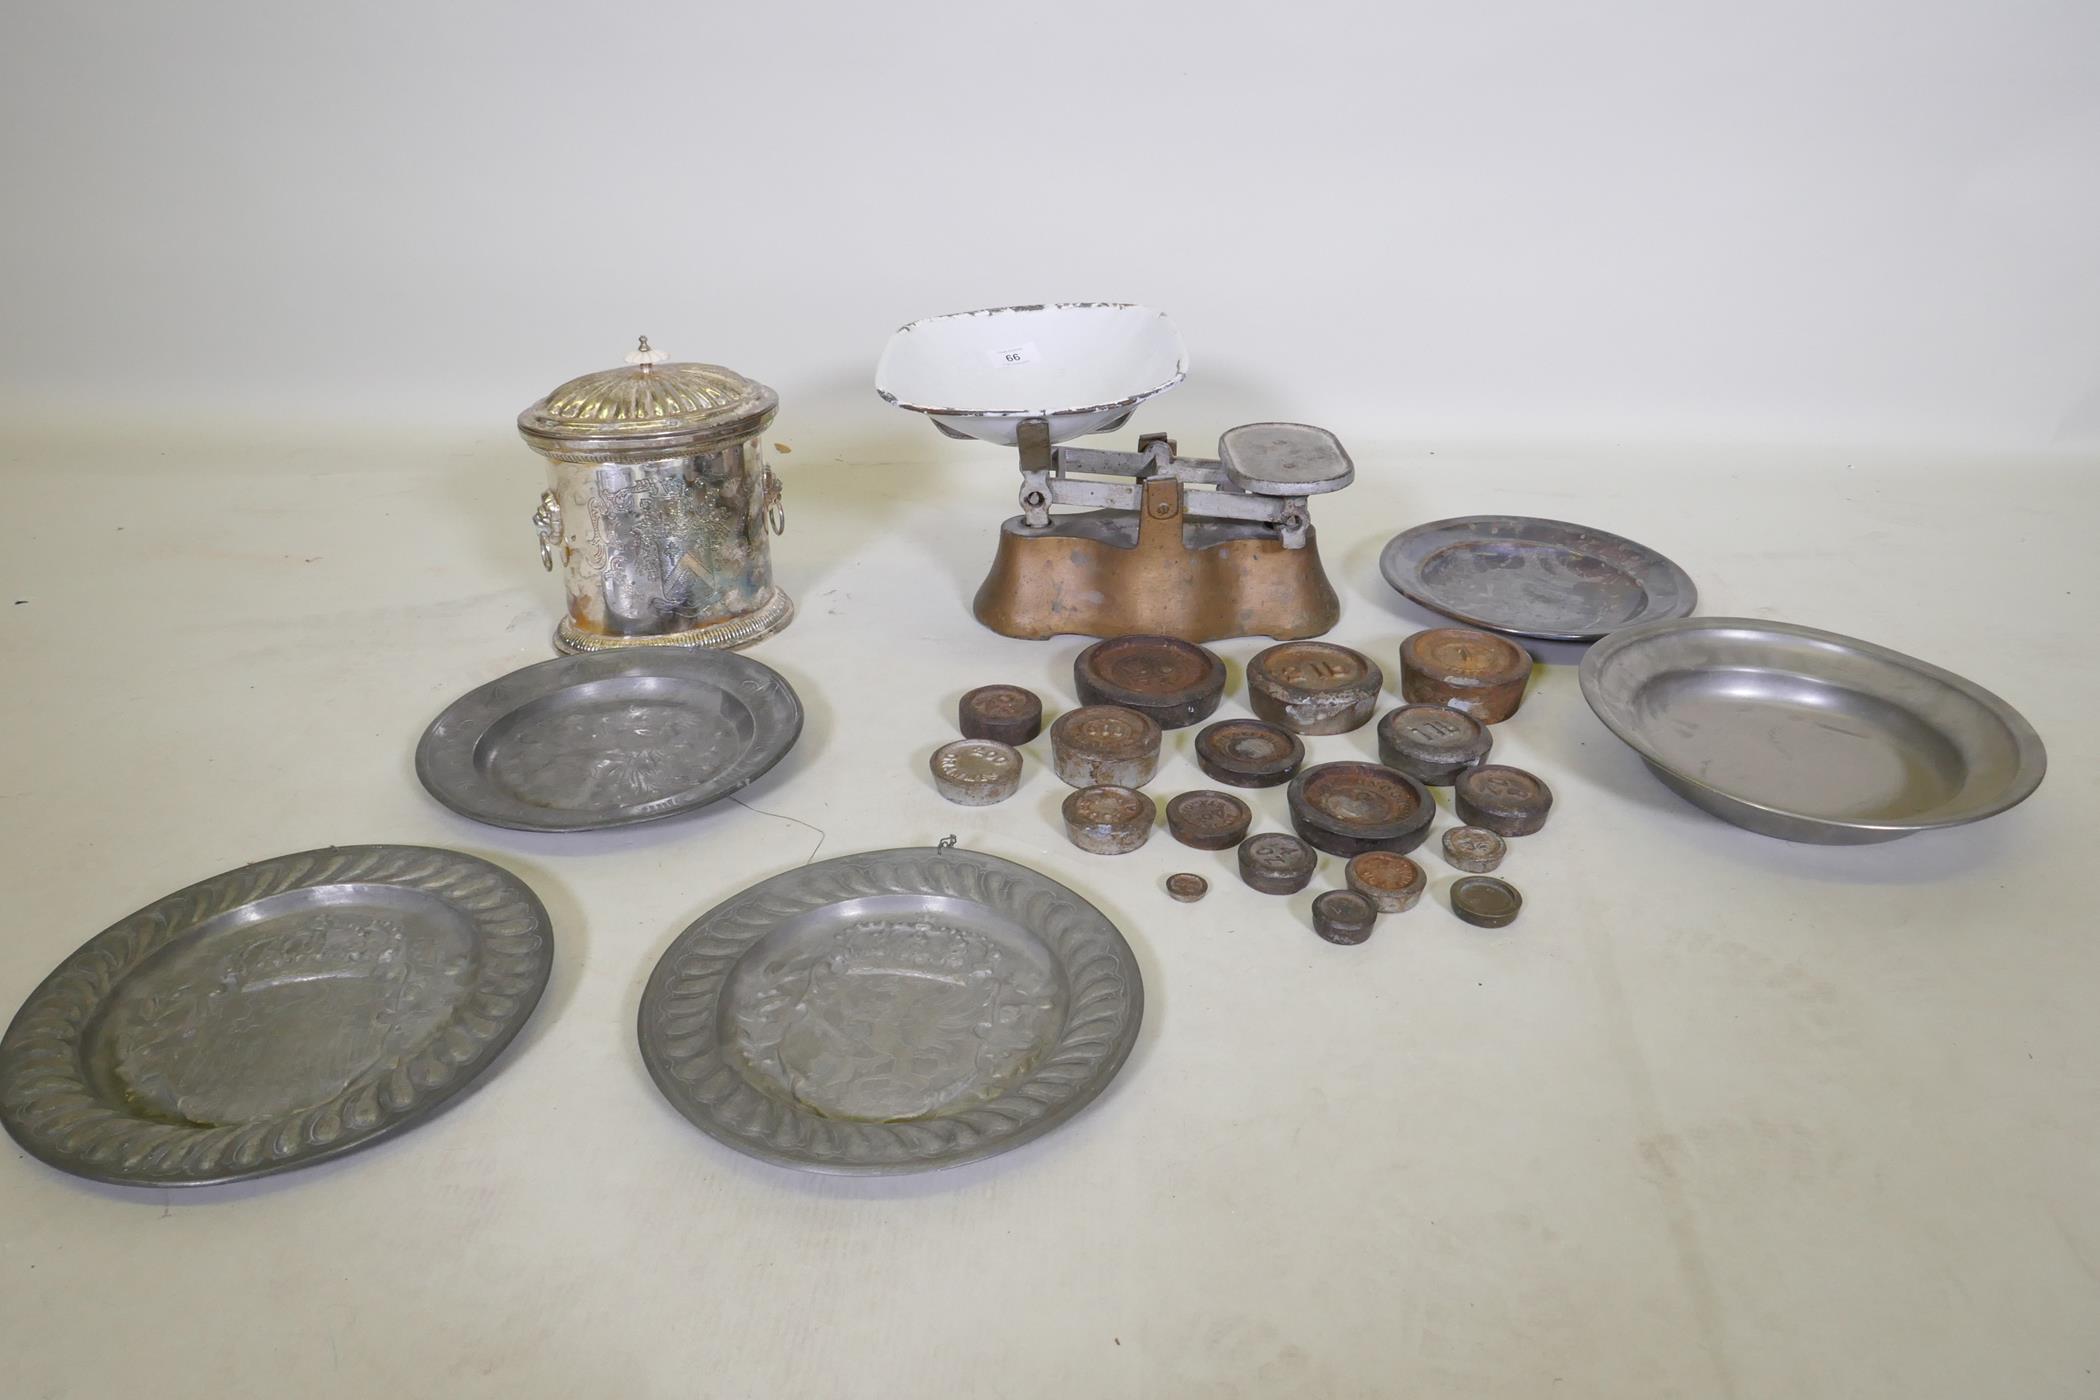 A set of antique weighing scales and weights, a pair of pewter plates with heraldic designs, a C19th